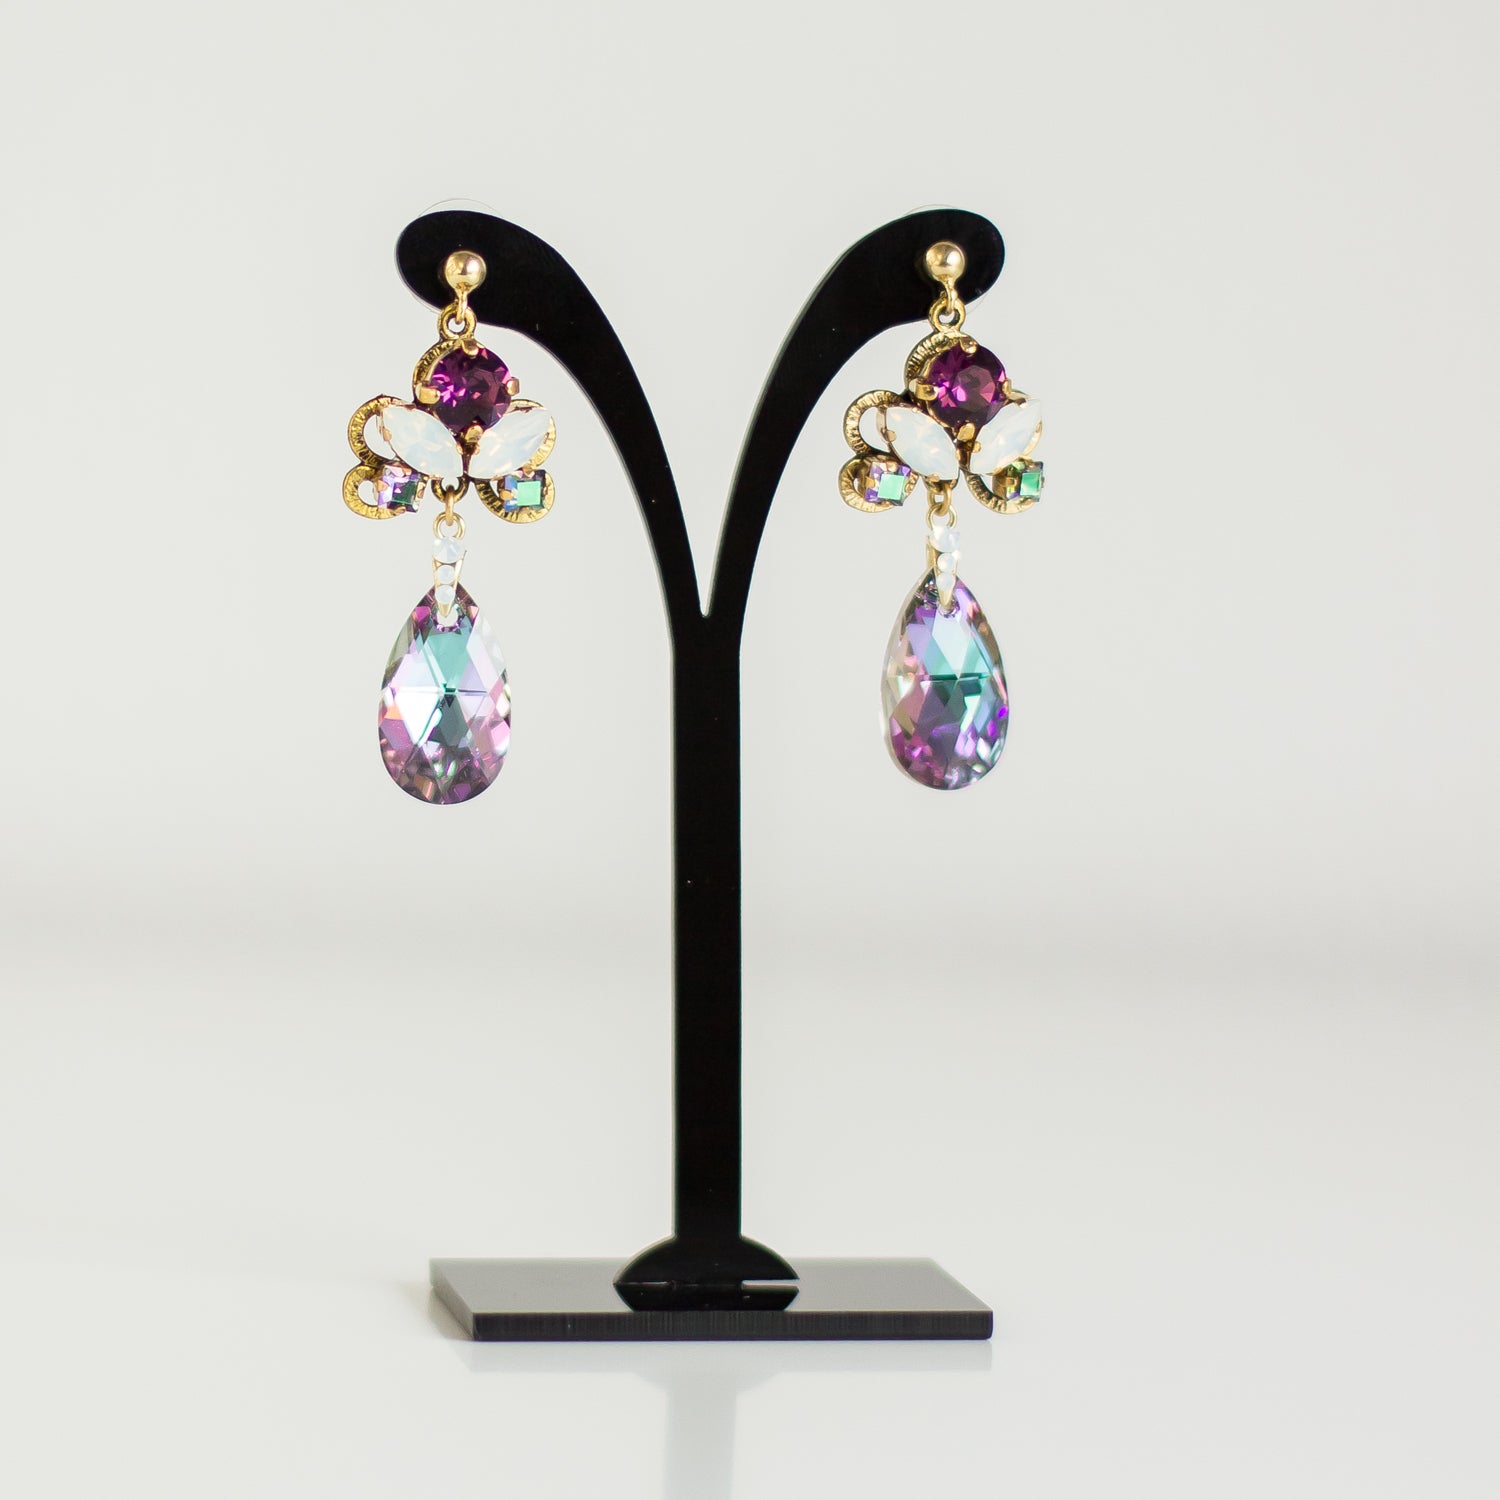 Rhinestone earrings, exquisite evening jewelry. Teardrop Vitrail Light Purple Swarovski crystal earrings with purple and white opal accessories make for a unique jewelry set.